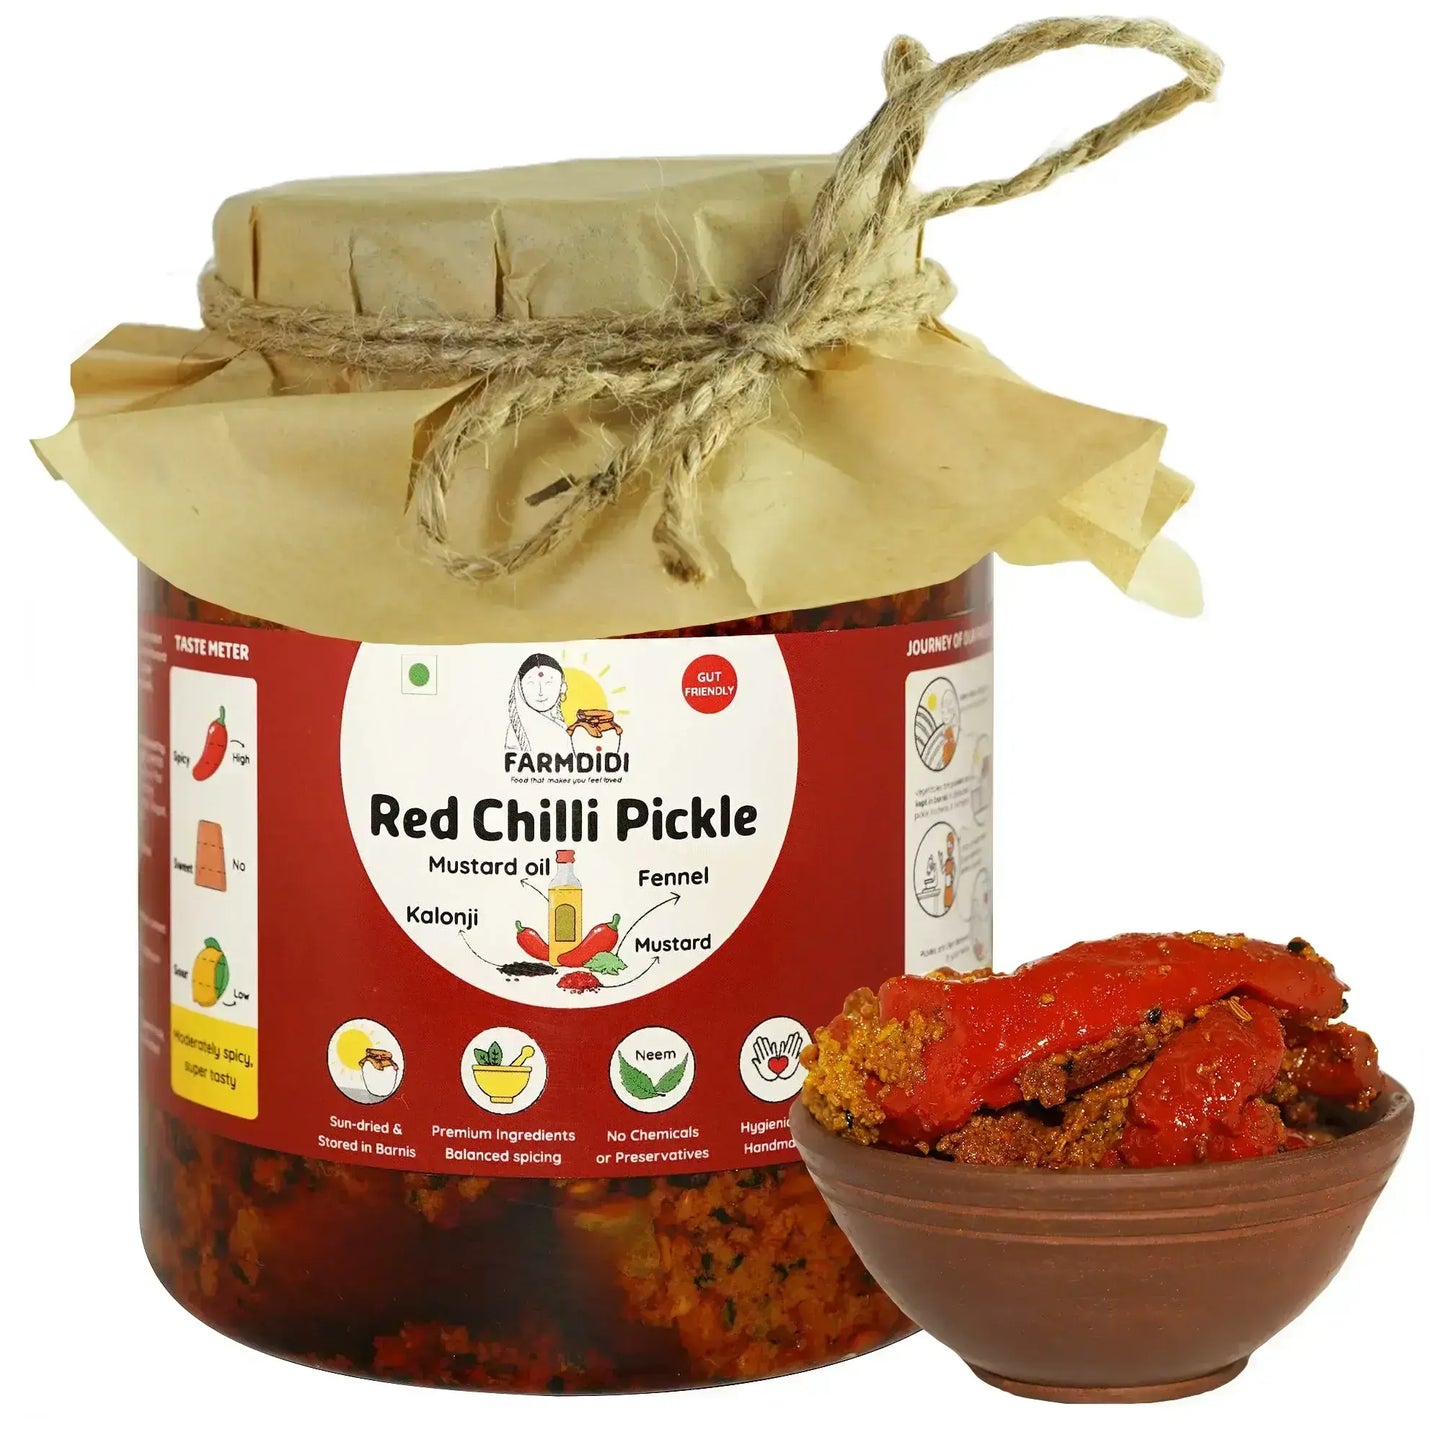 Is Red Chilli Pickle Good For Your Health?